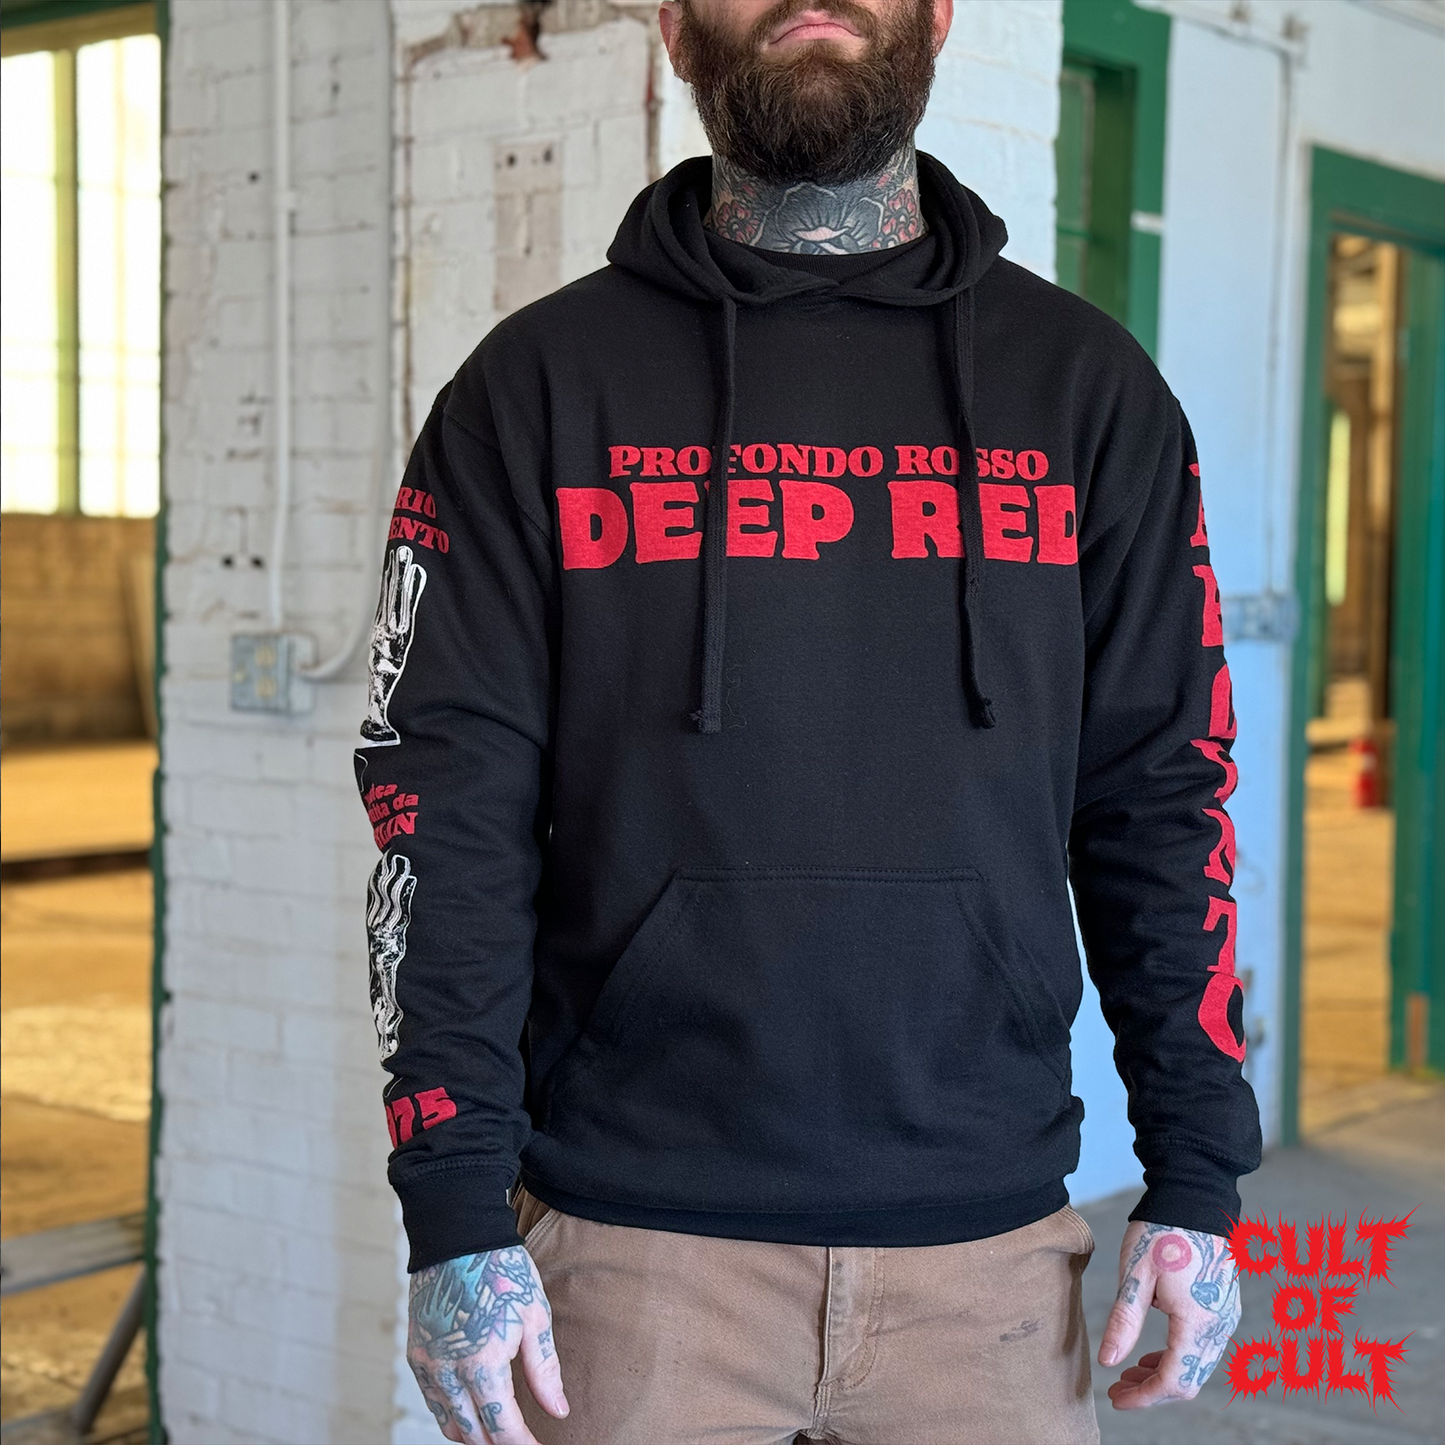 A model wearing the Deep Red Profondo Rosso hoodie, pictured from the front.